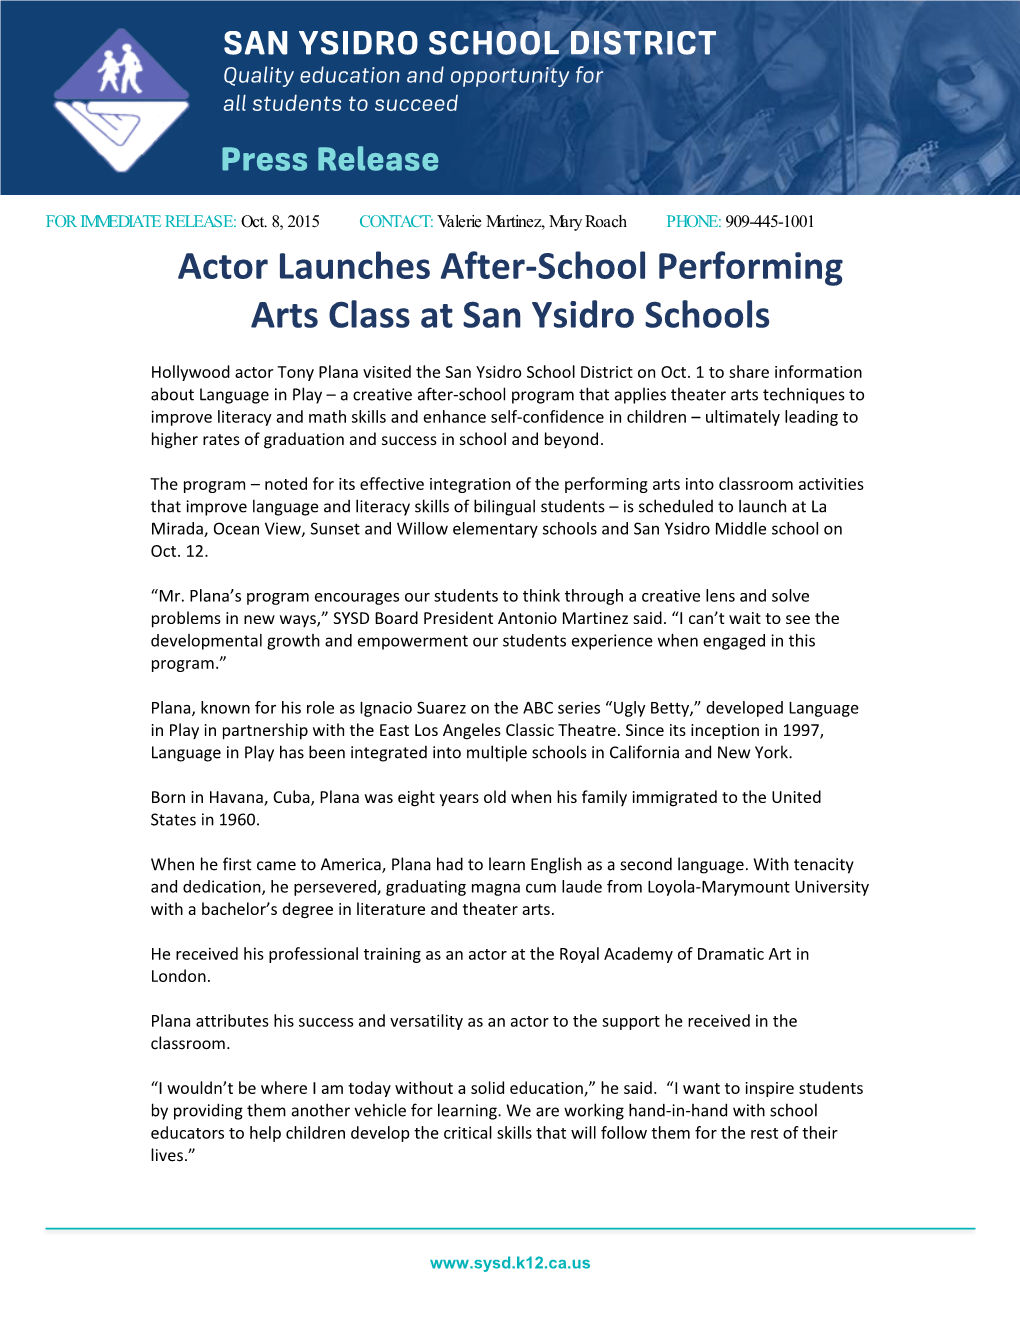 Actor Launches After-School Performing Arts Class at San Ysidro Schools